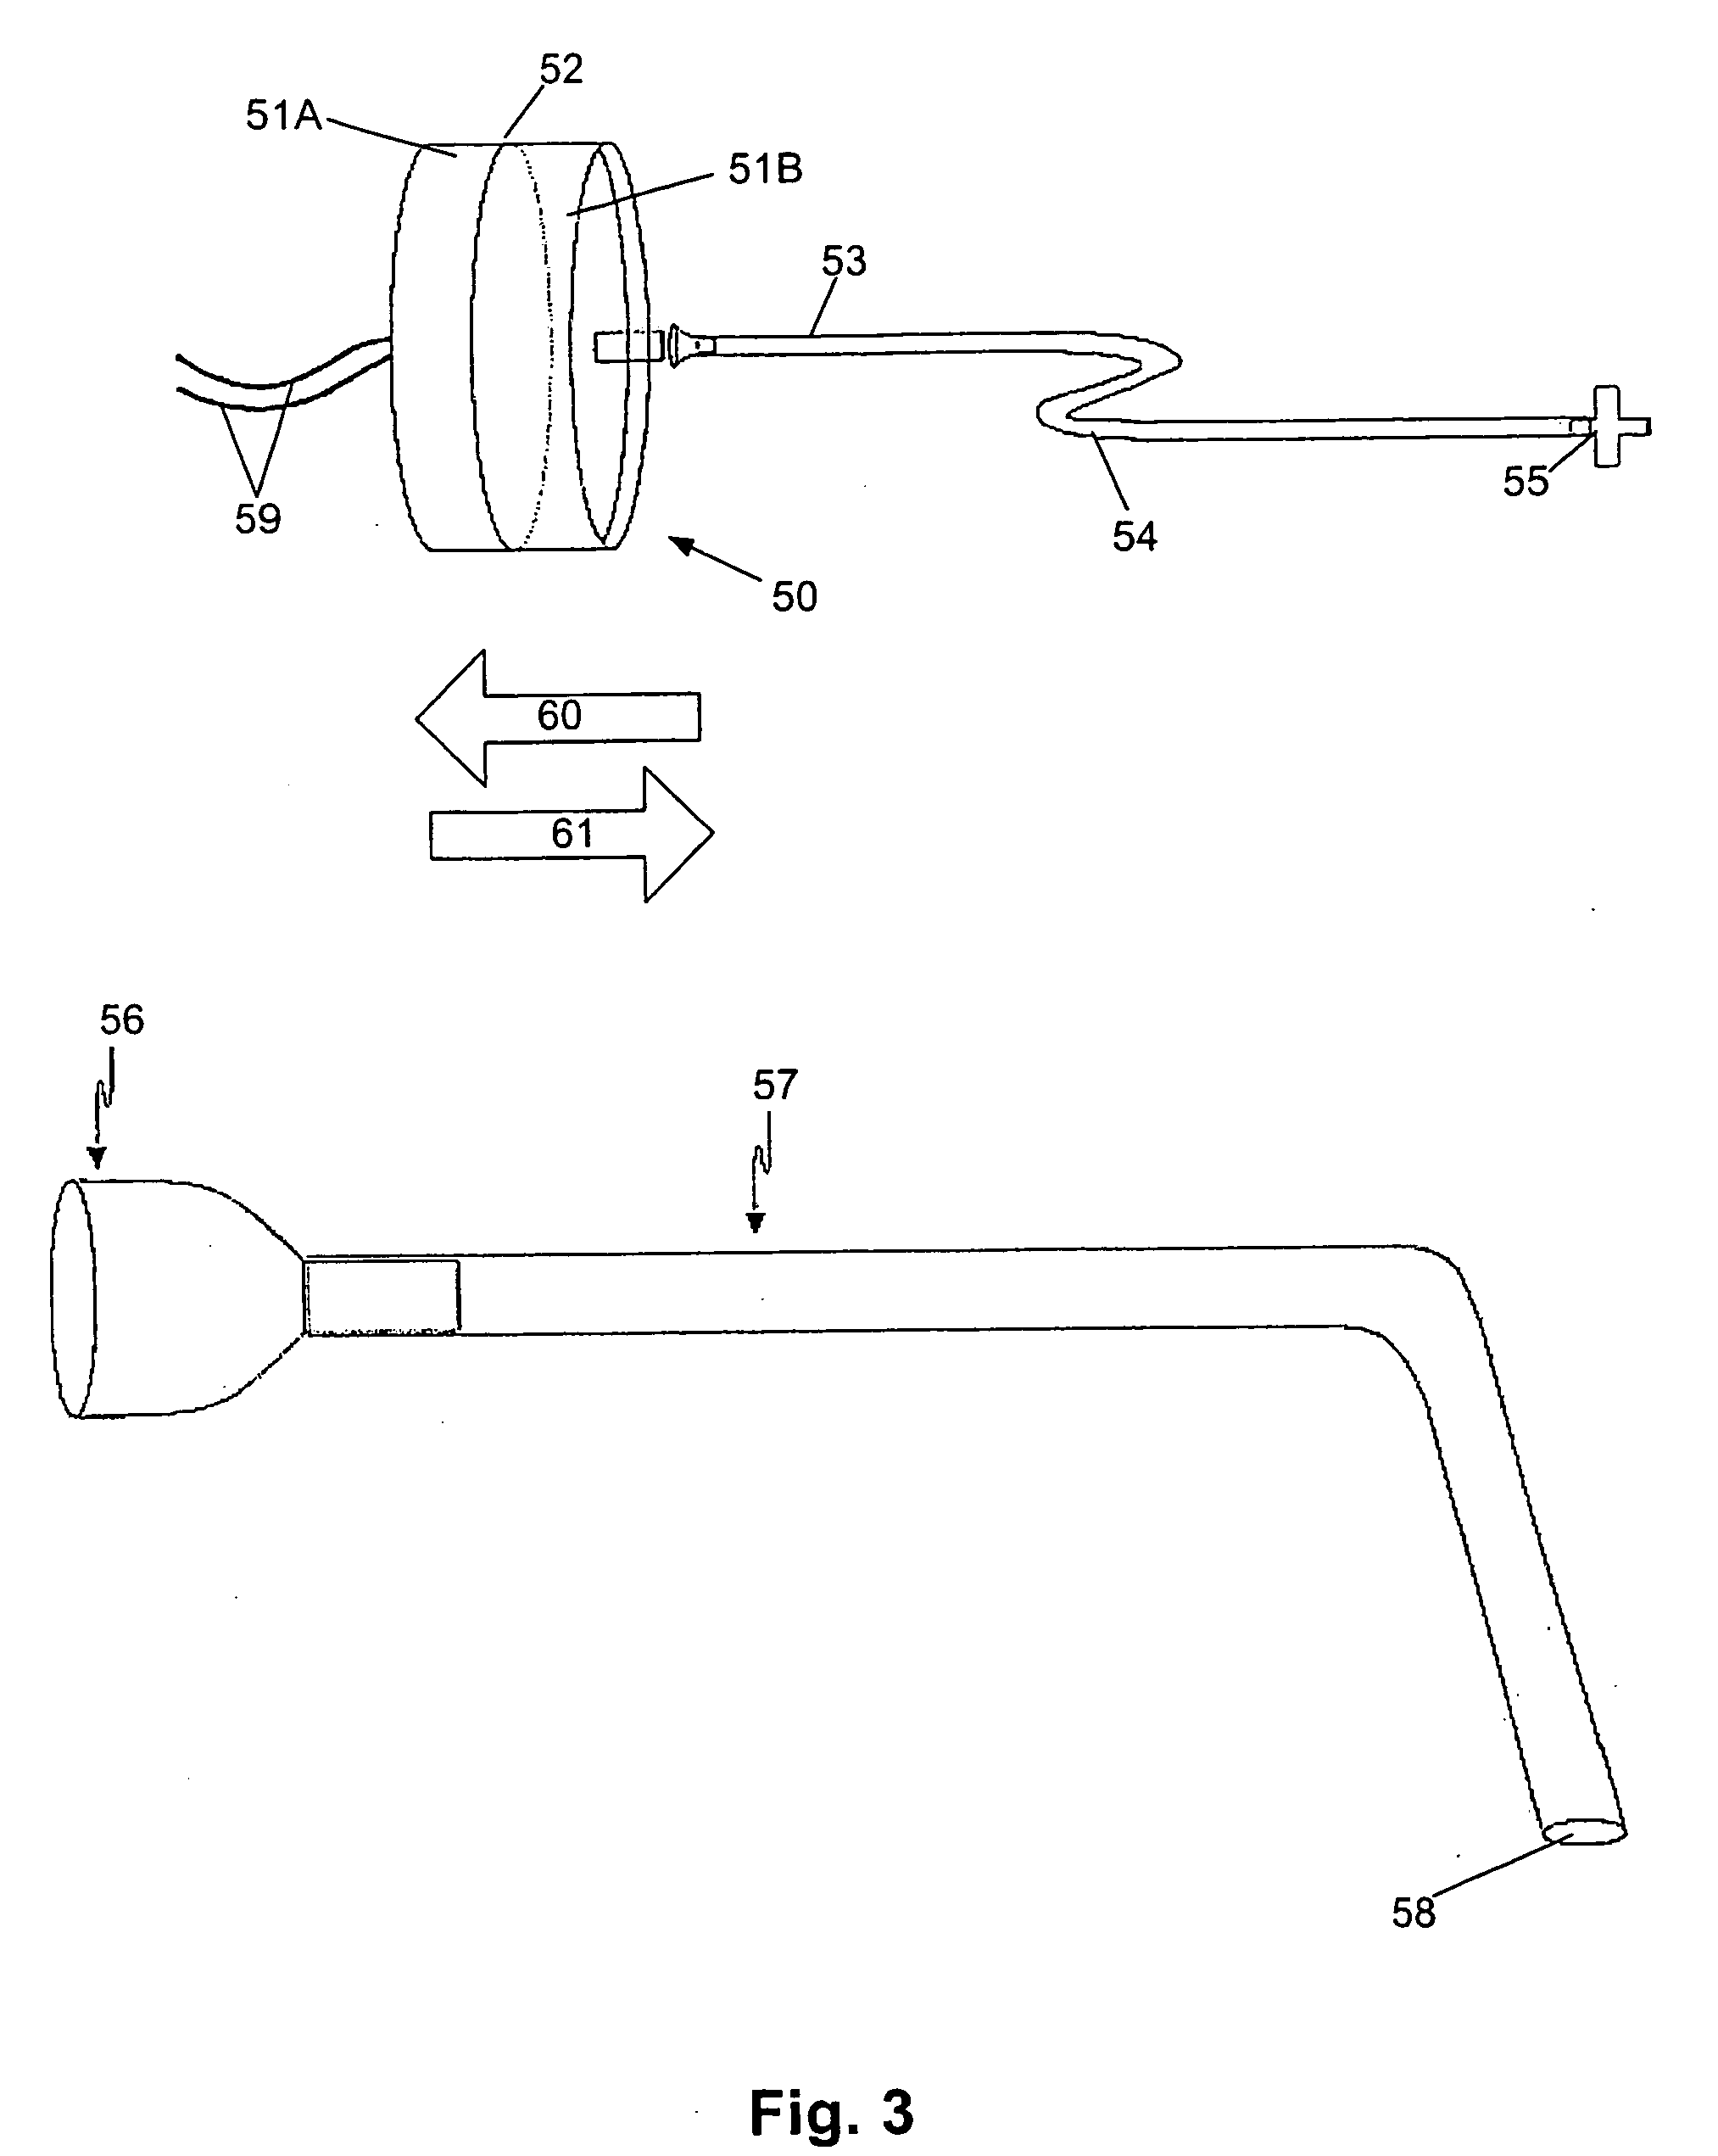 Method of cell therapy using fused cell hybrids